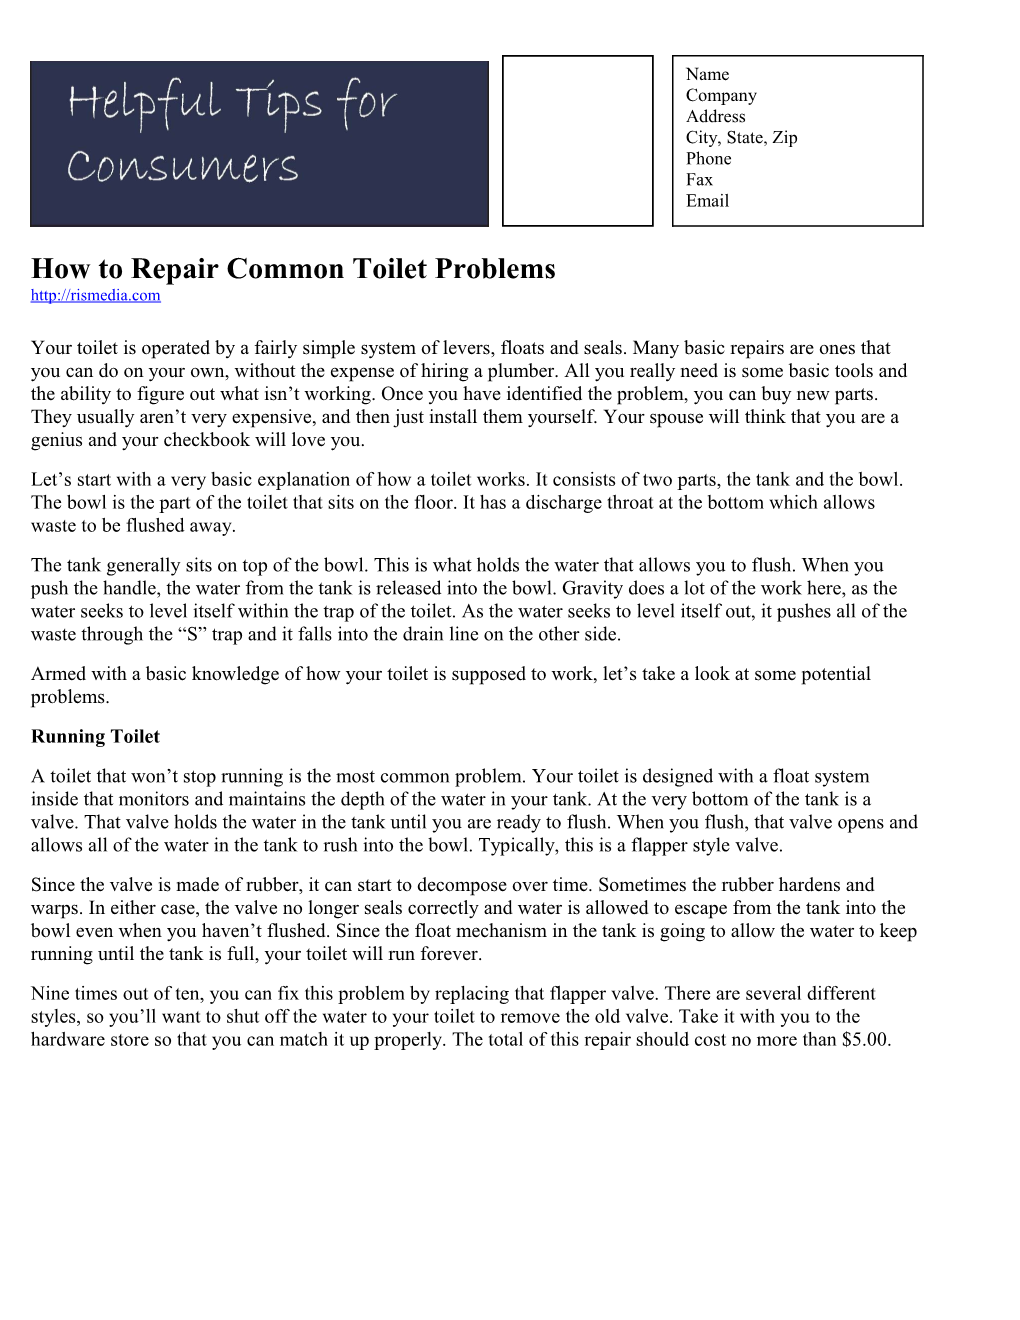 How to Repair Common Toilet Problems